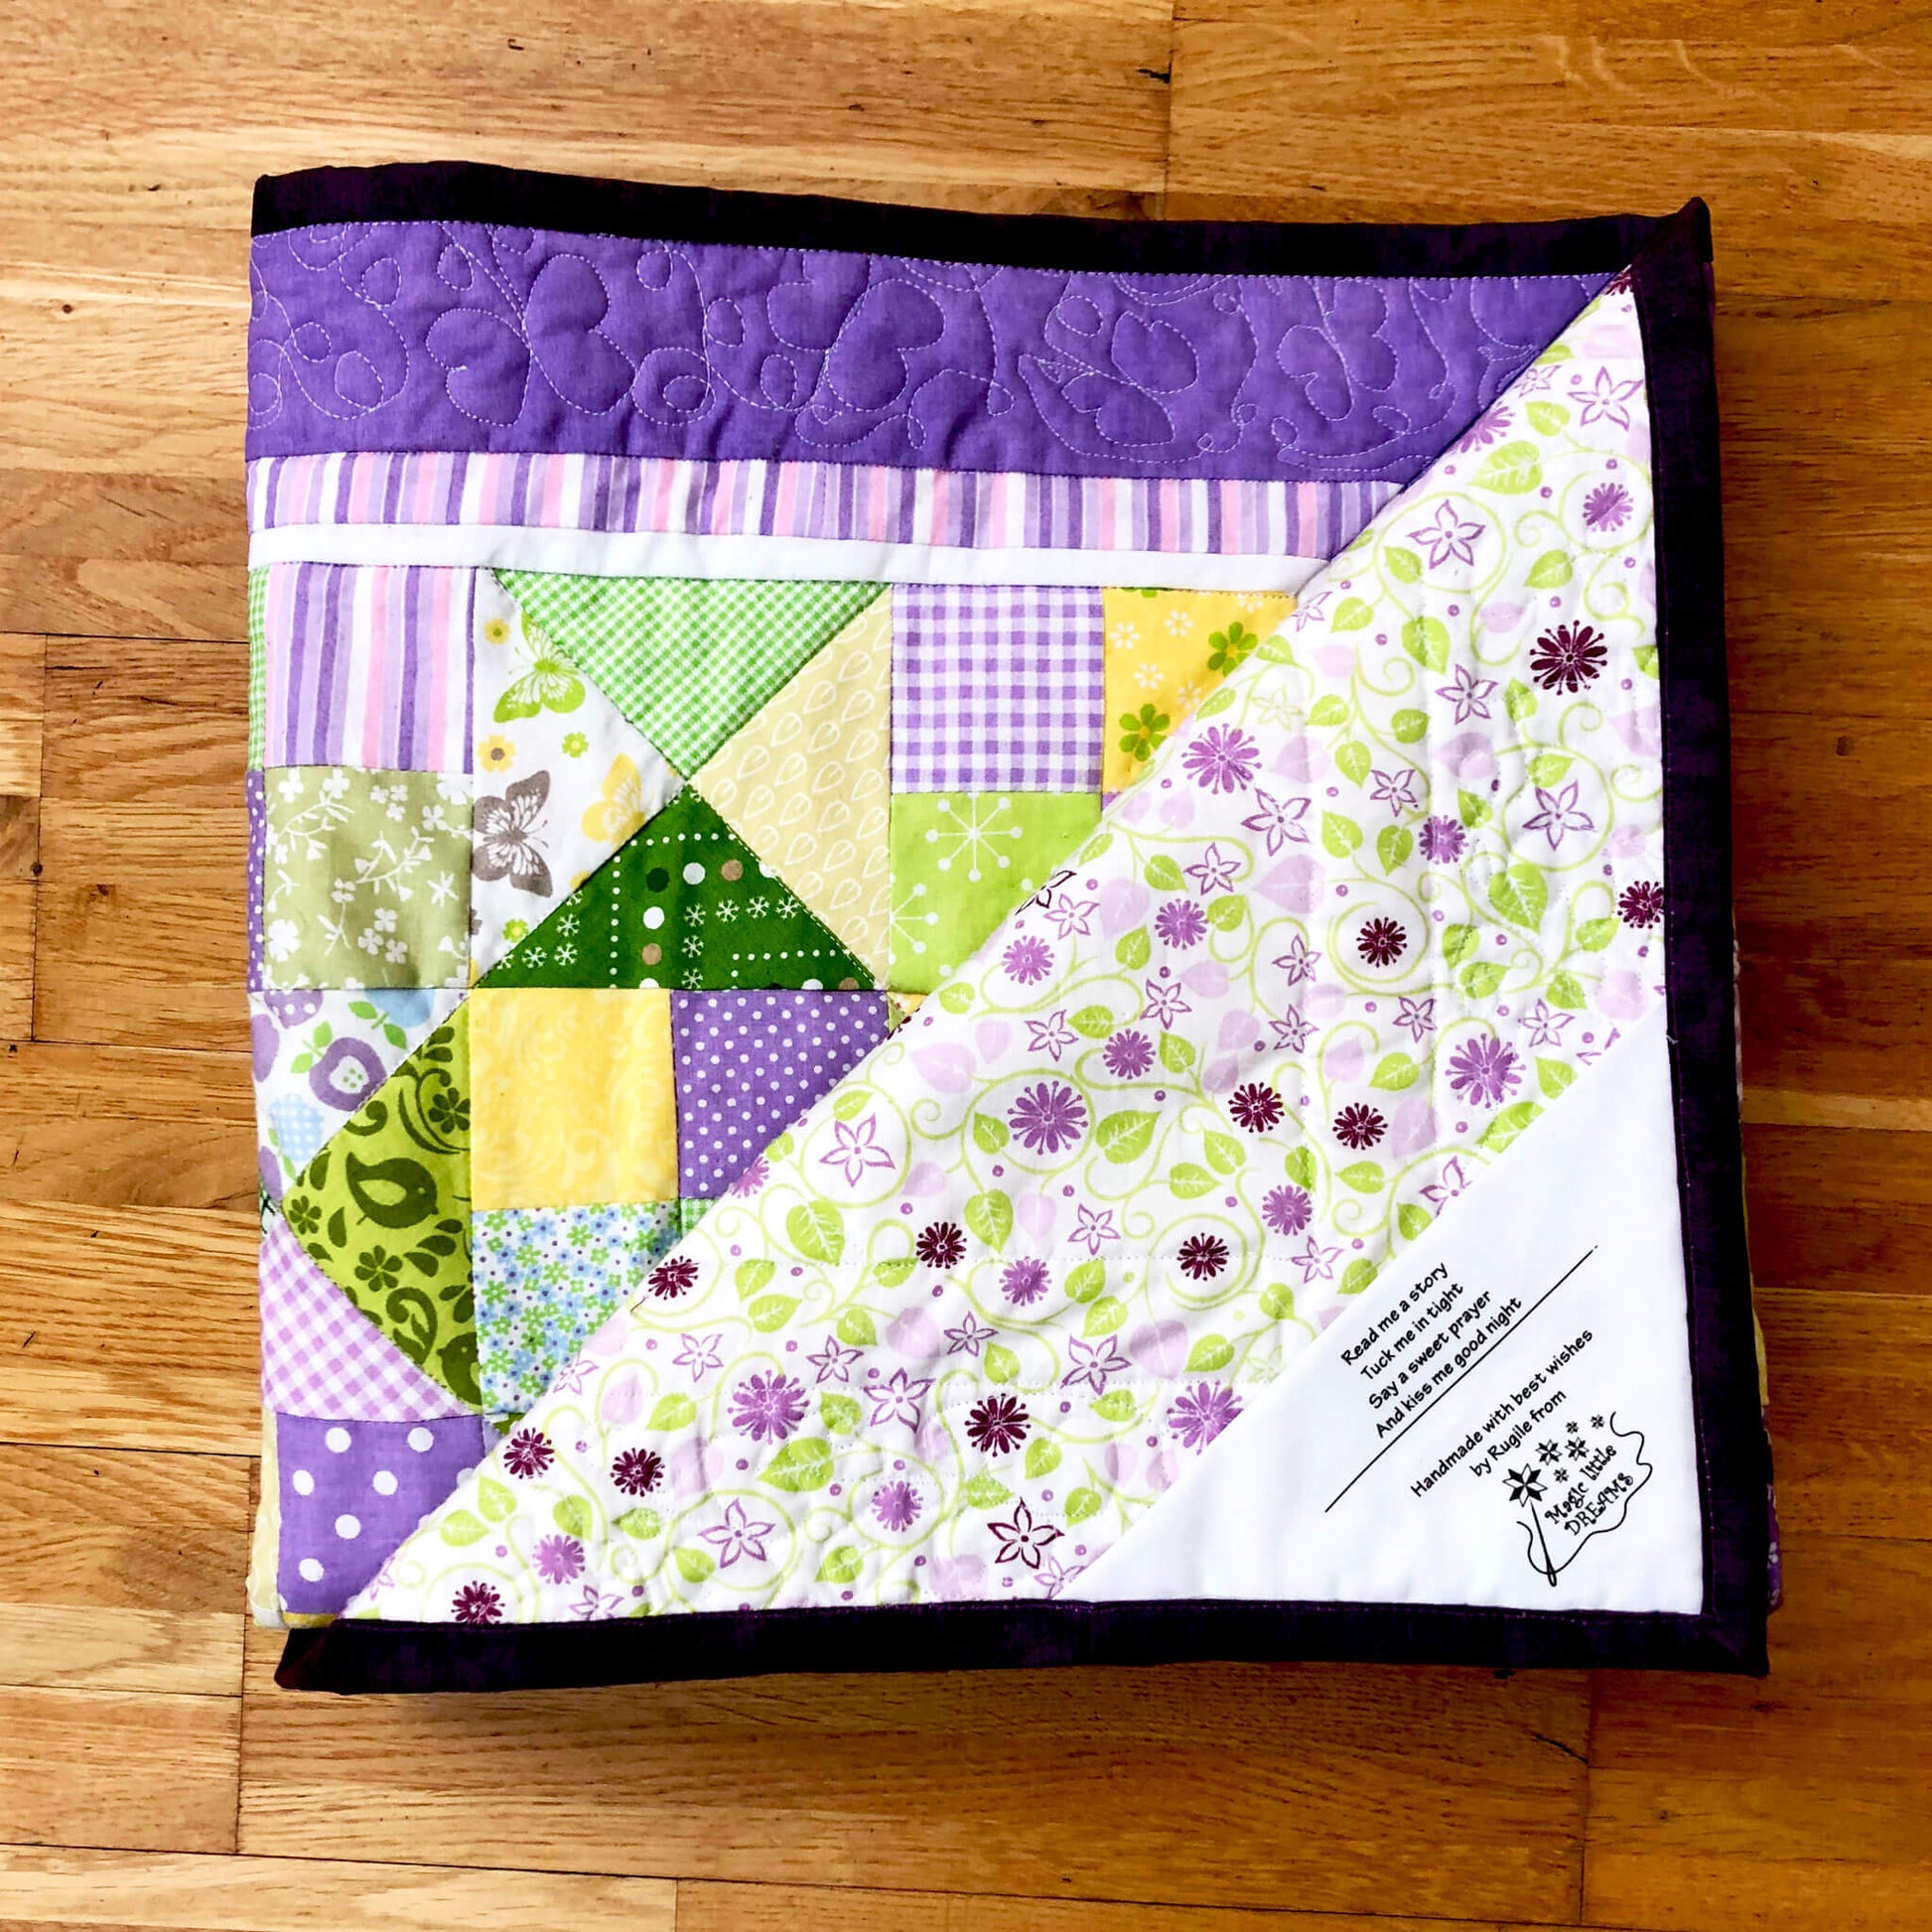 Folded quilt with a label